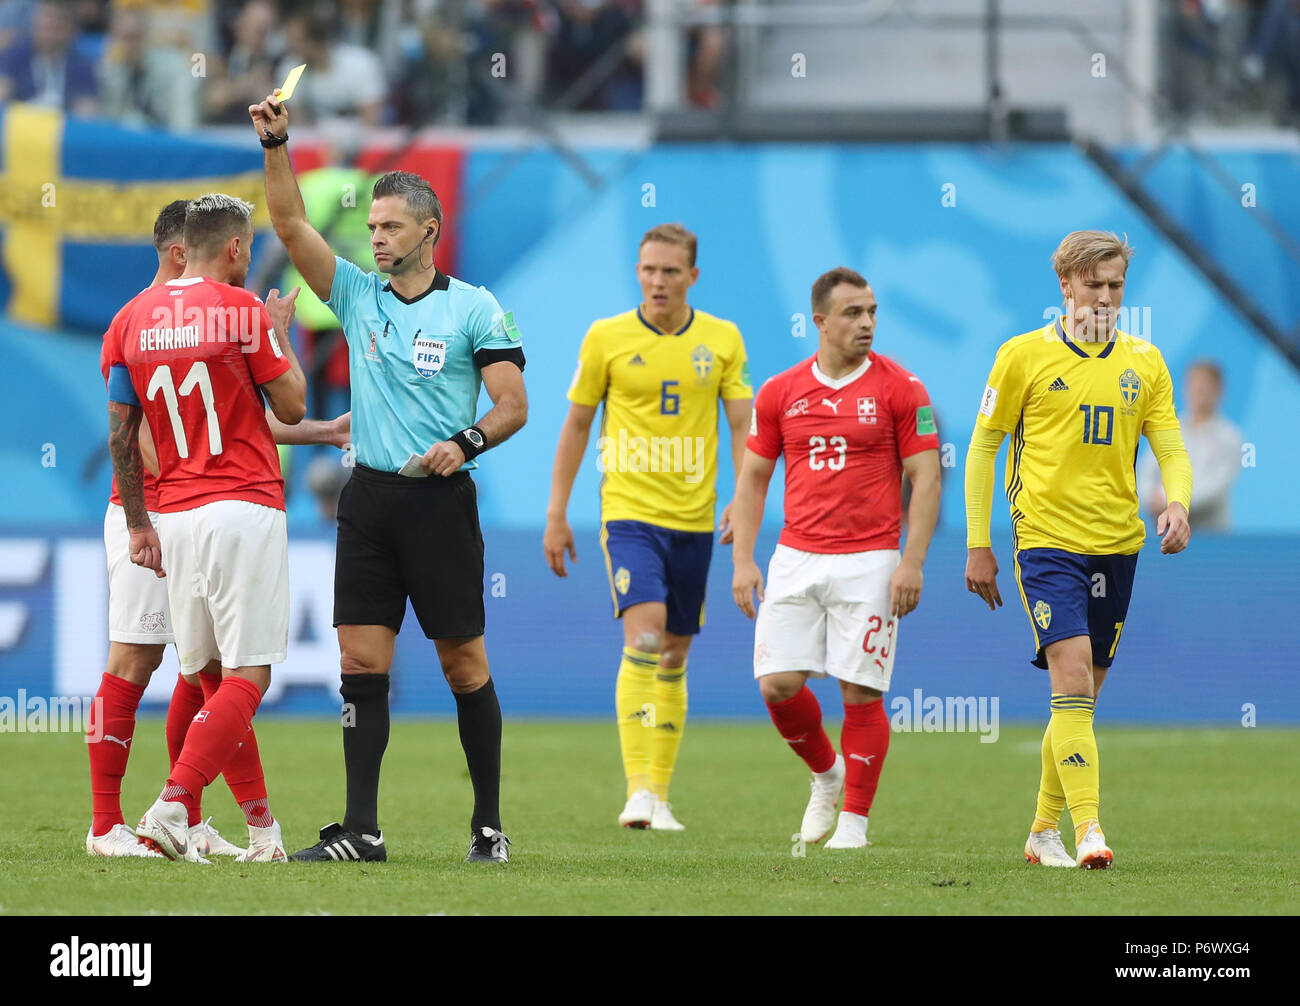 Saint Petersburg, Russia. 3rd July, 2018. The referee gives a yellow card to Valon Behrami (2nd L) of Switzerland during the 2018 FIFA World Cup round of 16 match between Switzerland and Sweden in Saint Petersburg, Russia, July 3, 2018. Sweden won 1-0 and advanced to the quarter-final. Credit: Cao Can/Xinhua/Alamy Live News Stock Photo